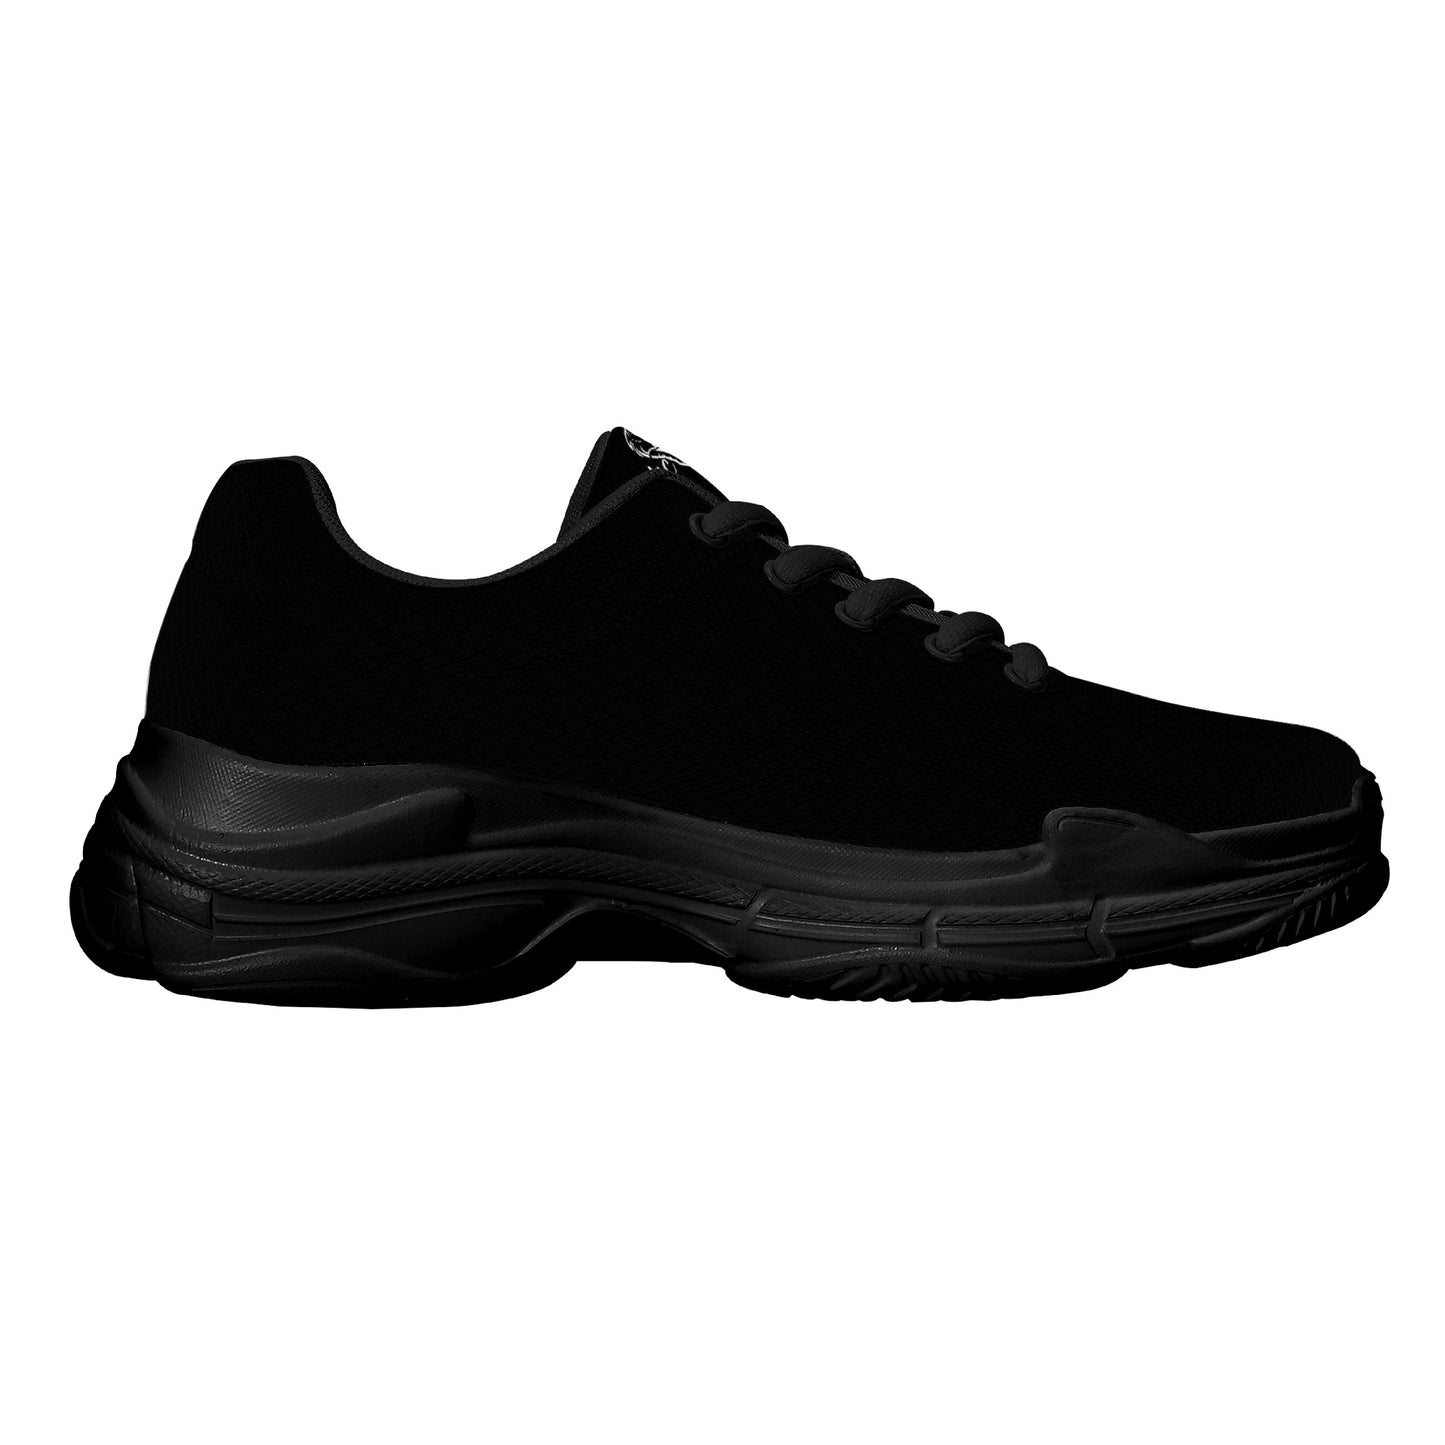 Cryptic Sneakers, Black